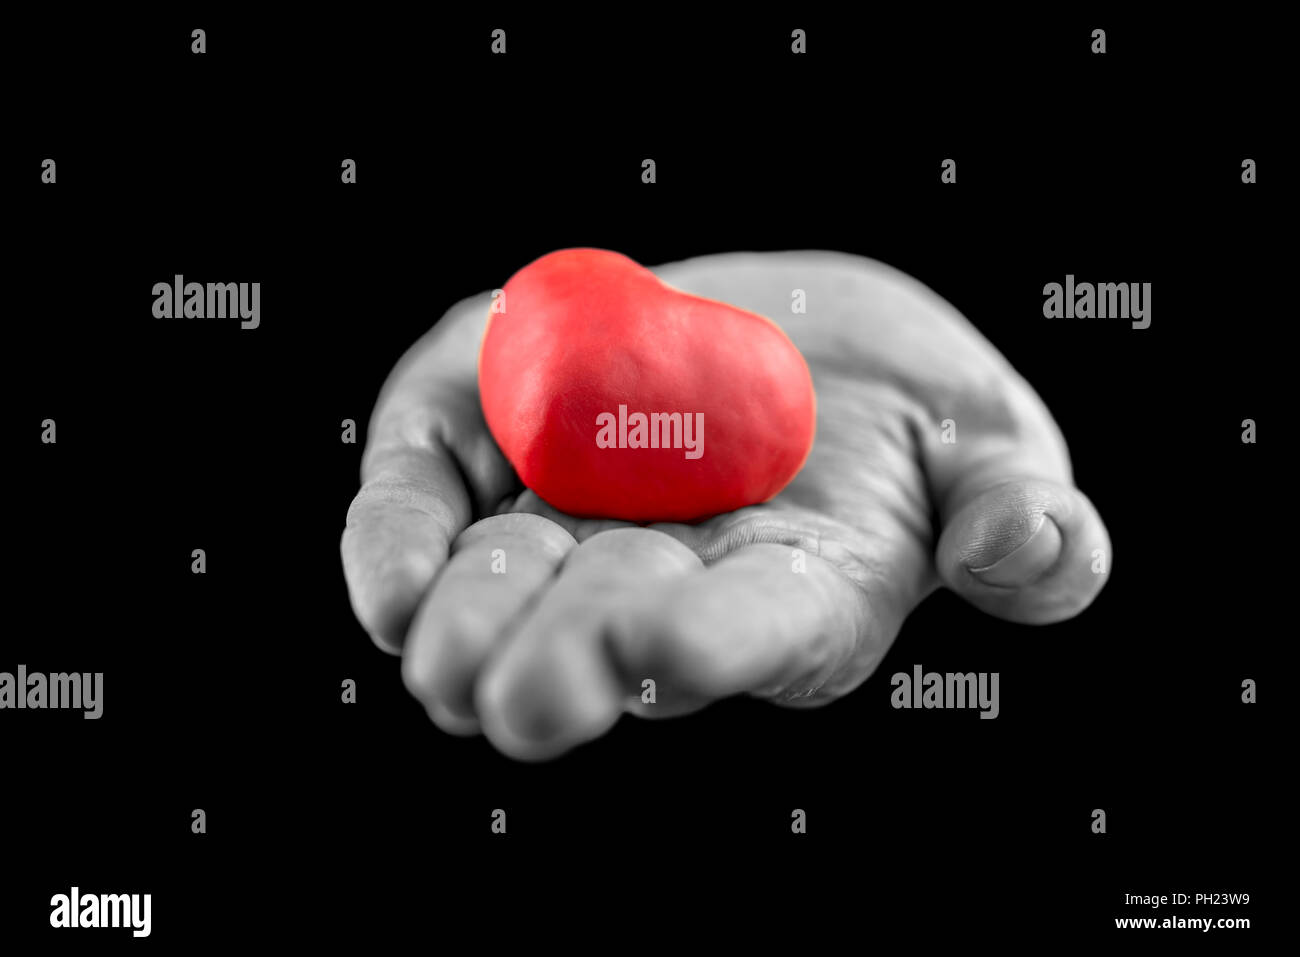 Man making the gift of Love to his sweetheart on Valentines Day offering a red heart in his outstretched hand, greyscale image with selective red colo Stock Photo